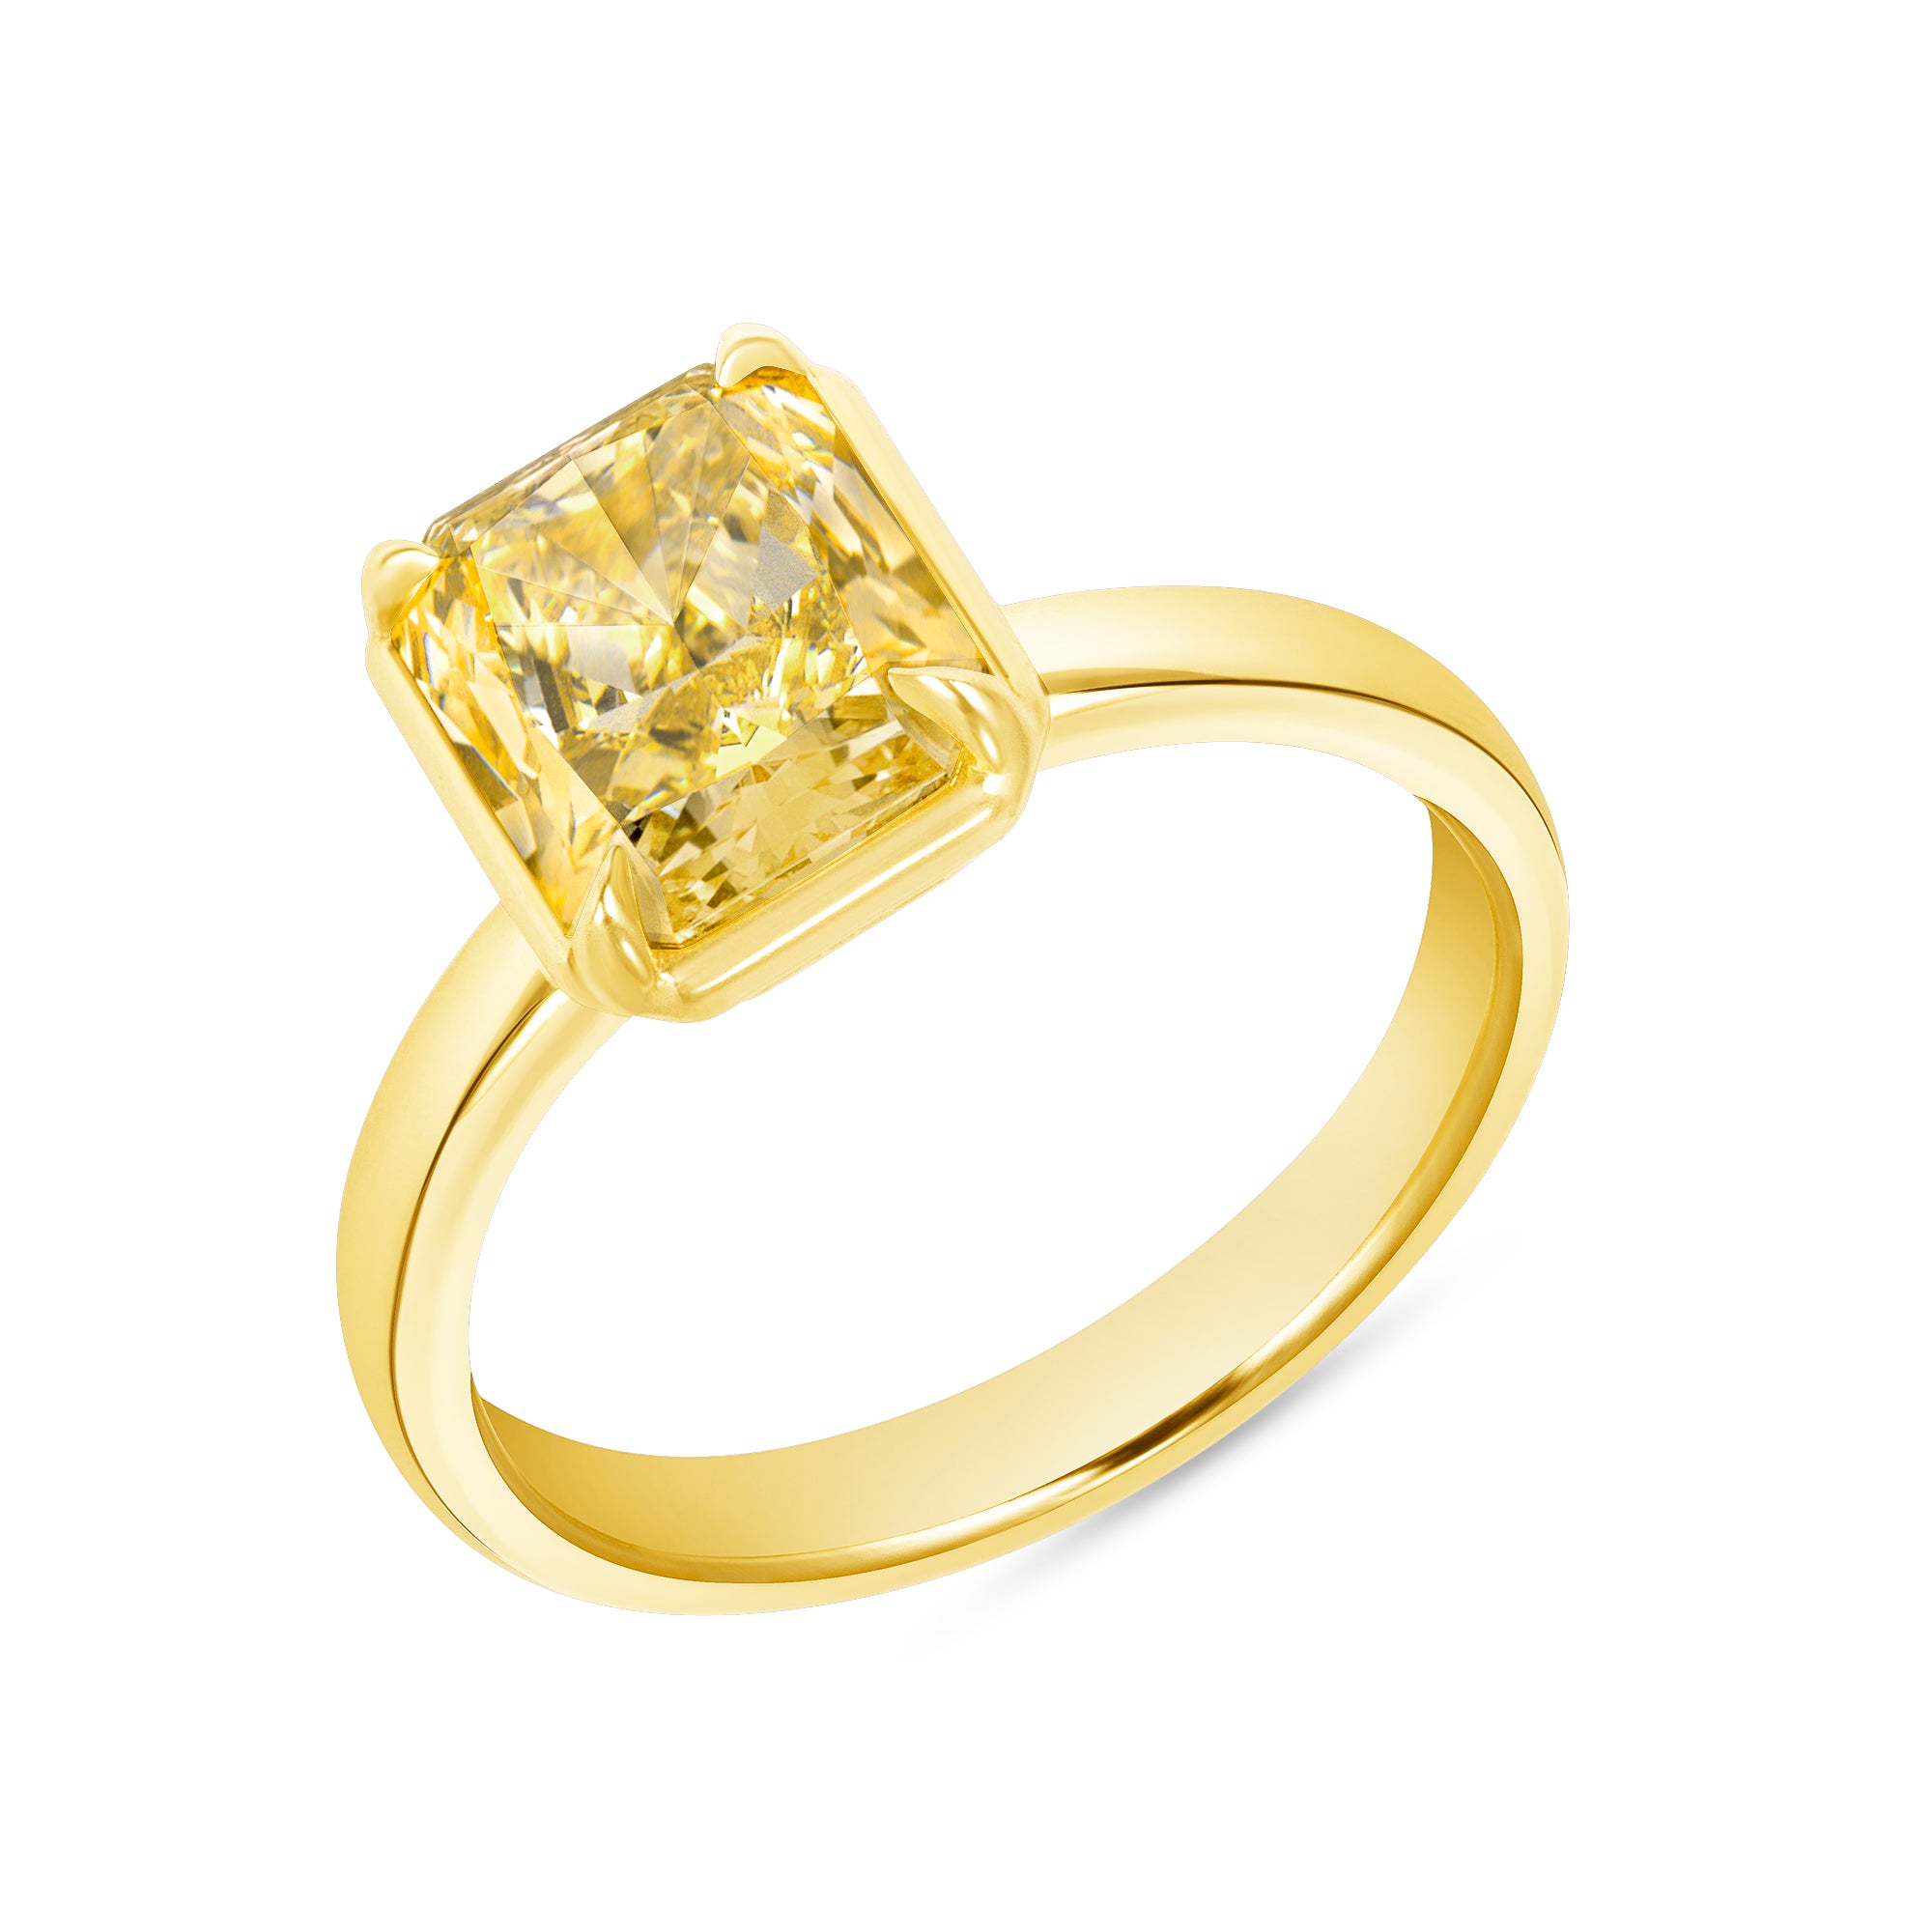 Radiant Cut Fancy Yellow Diamond Solitaire Ring in 18 Karat Yellow Gold